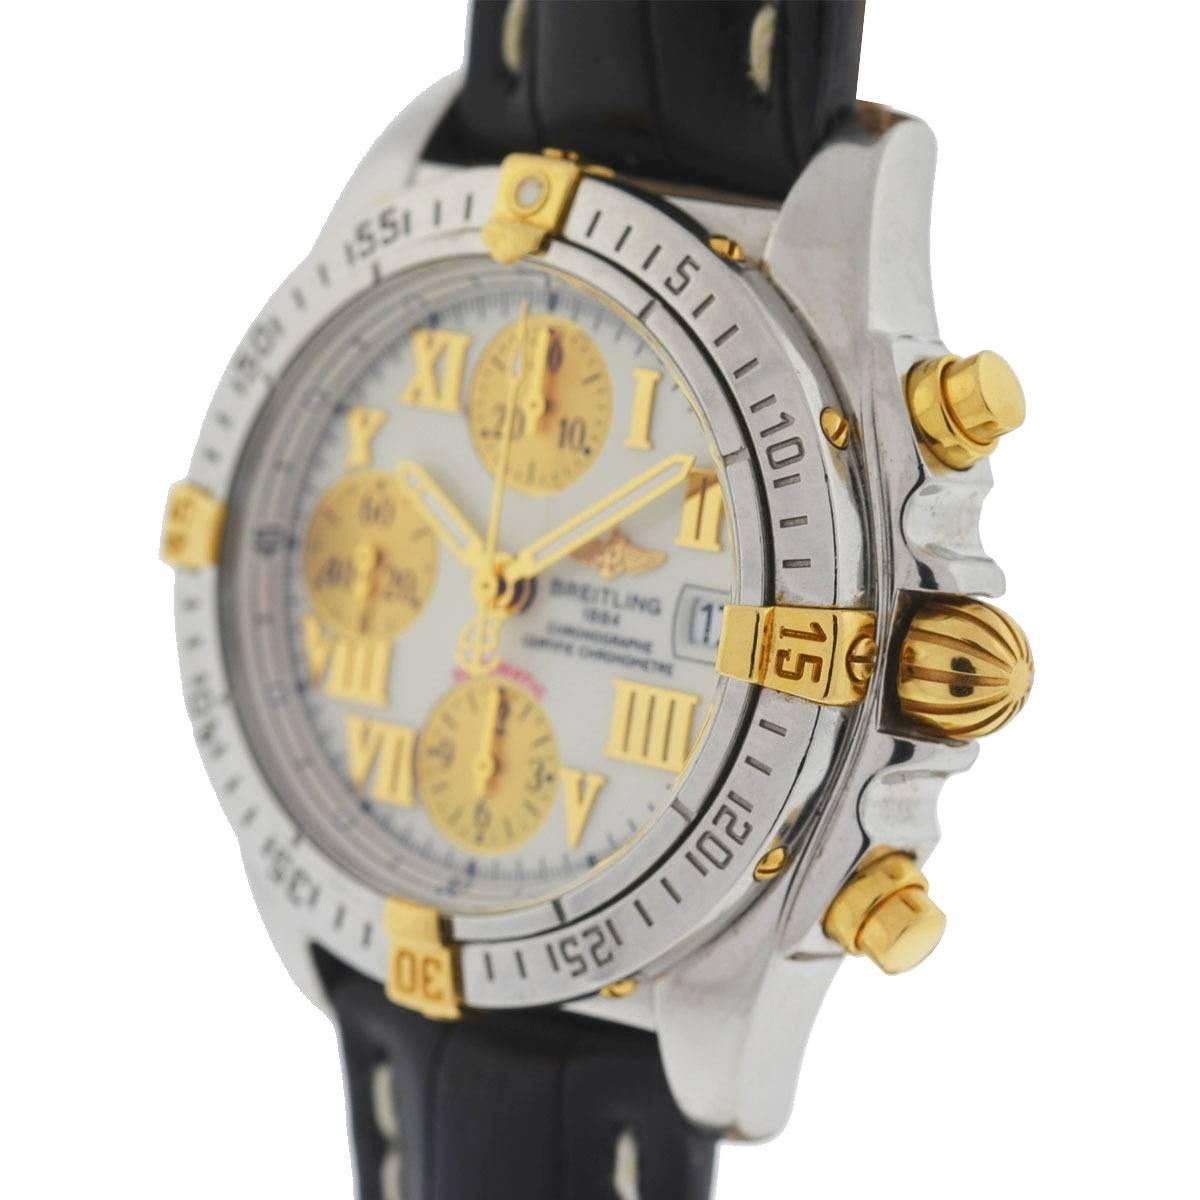 Company - Breitling
Style - Luxury Sport Watch
Model - Chrono Cockpit
Reference Number - B13358
Case Metal - Stainless Steel
Case Measurement - 39 mm
Bracelet - Leather Strap
Dial - White and Gold Chrono
Bezel - Stainless Steel / Yellow Gold
Crystal